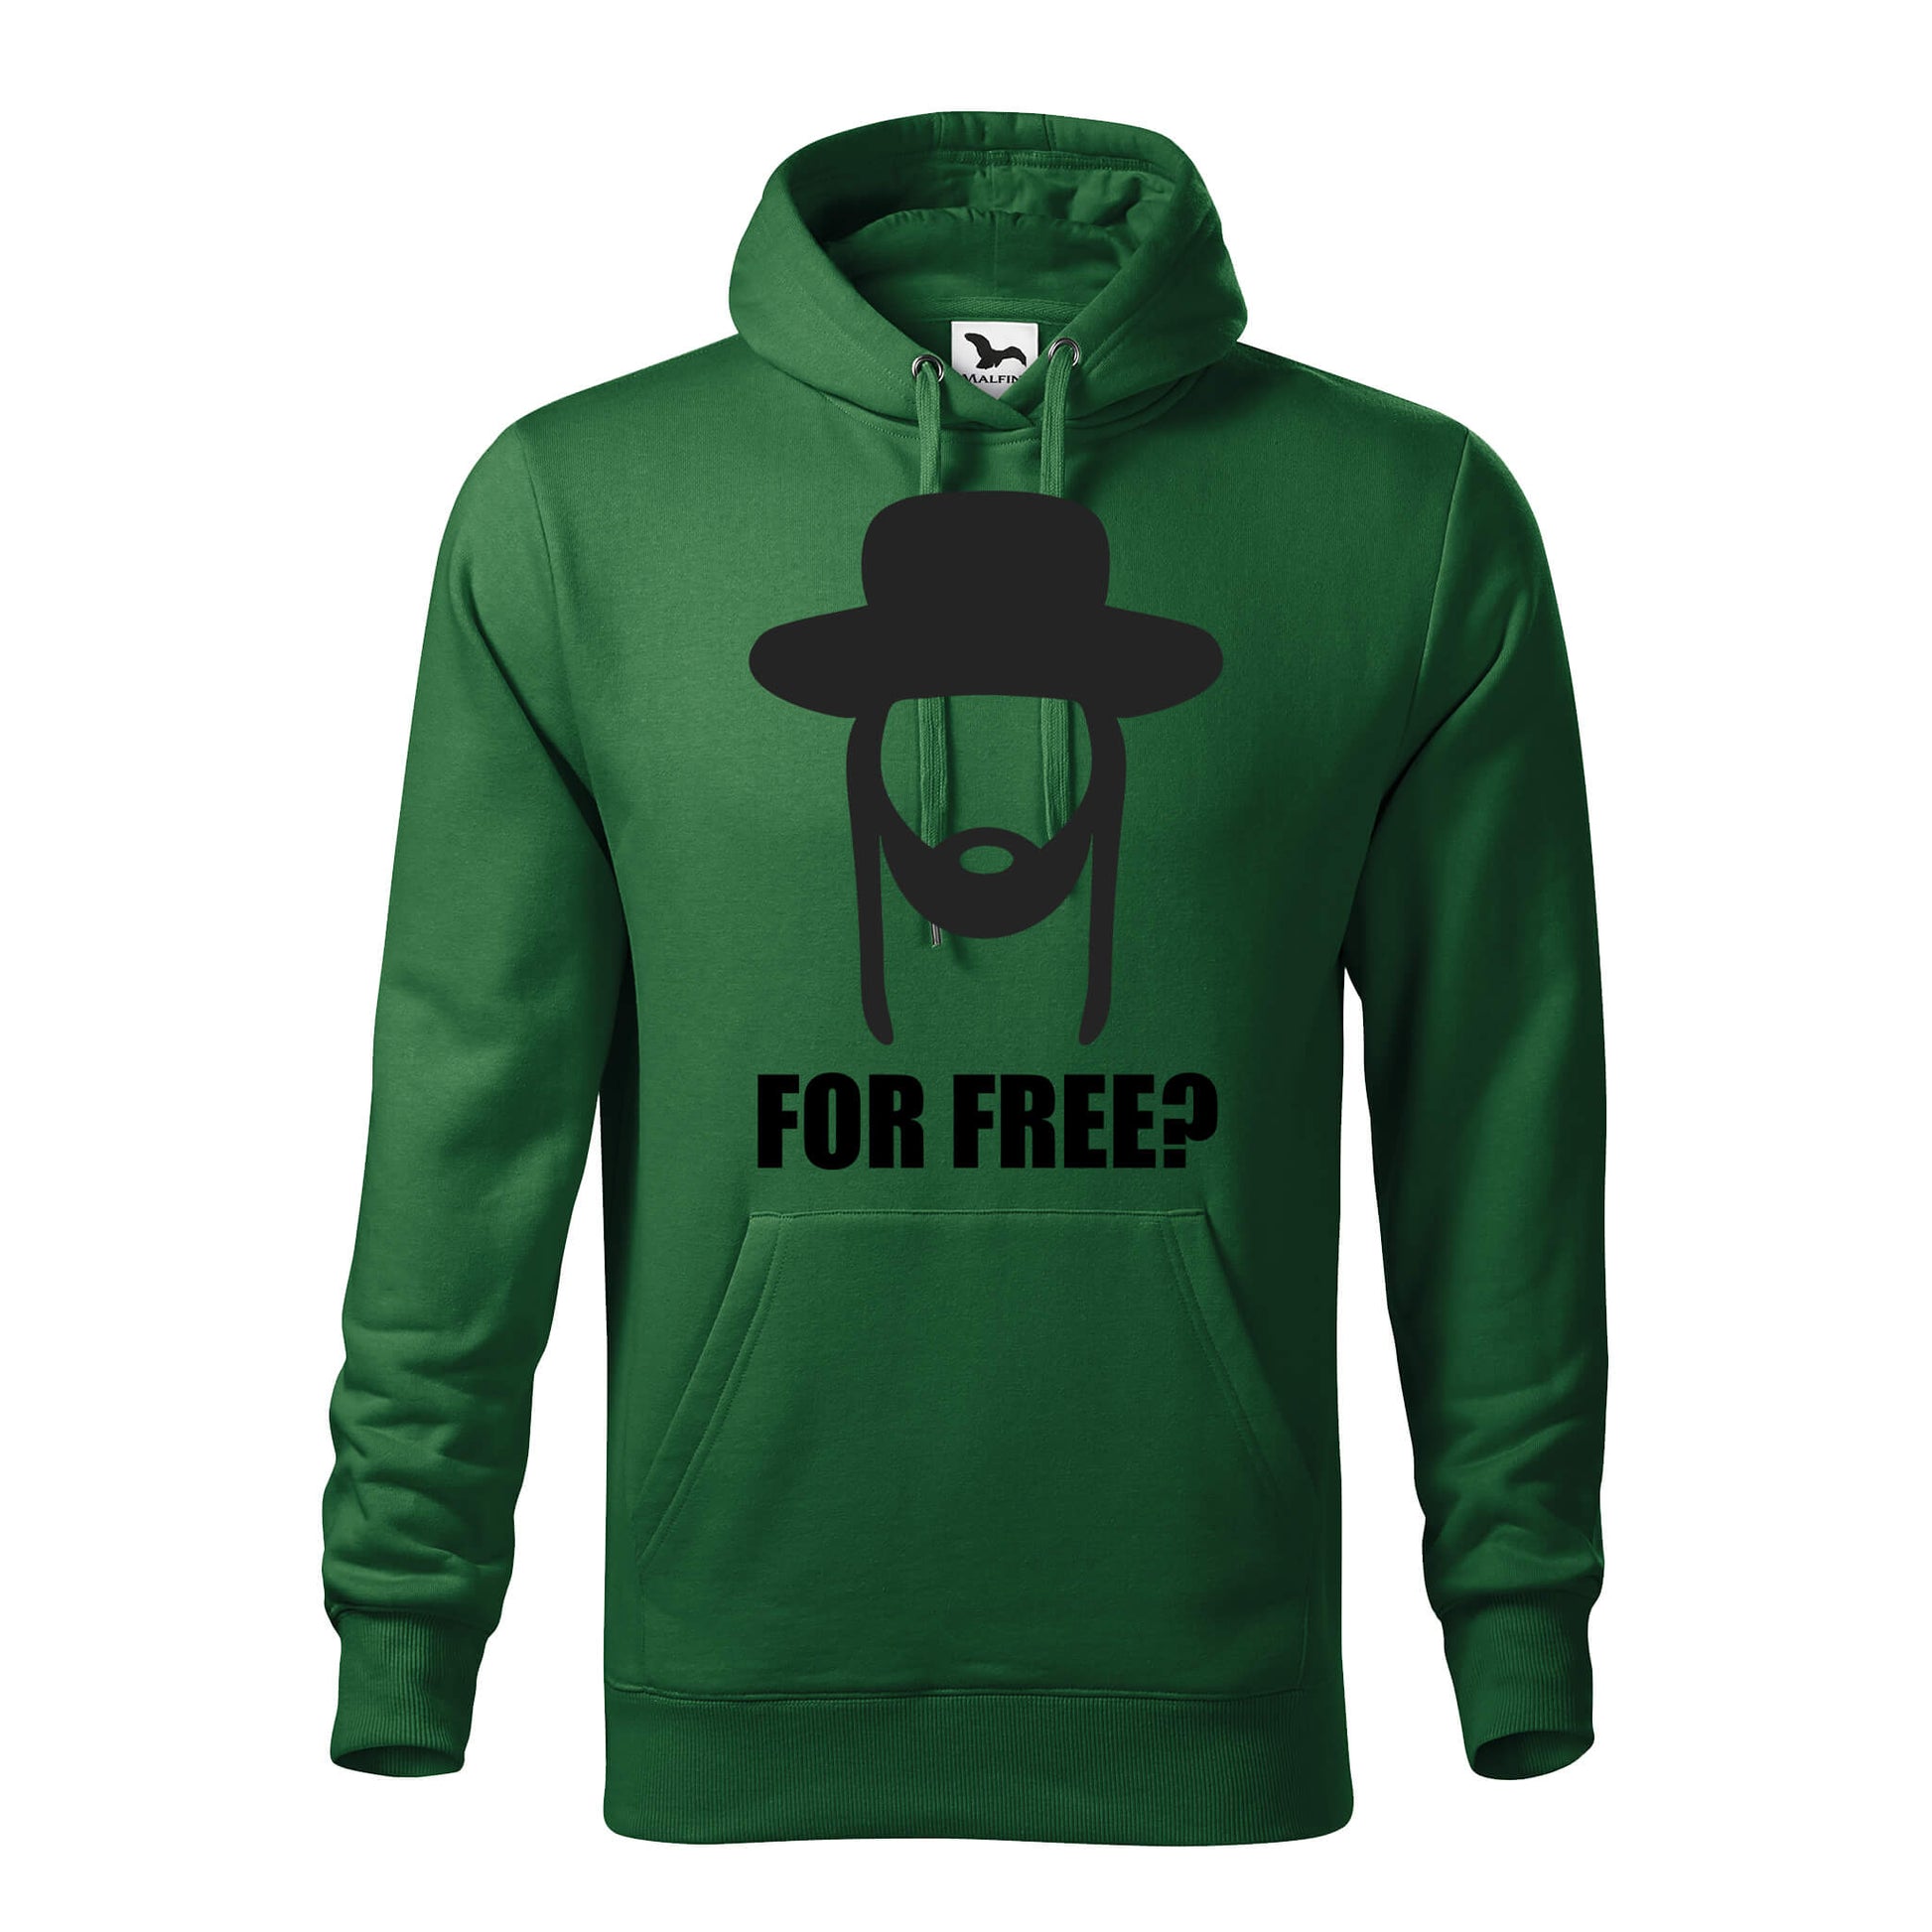 For free hoodie - rvdesignprint